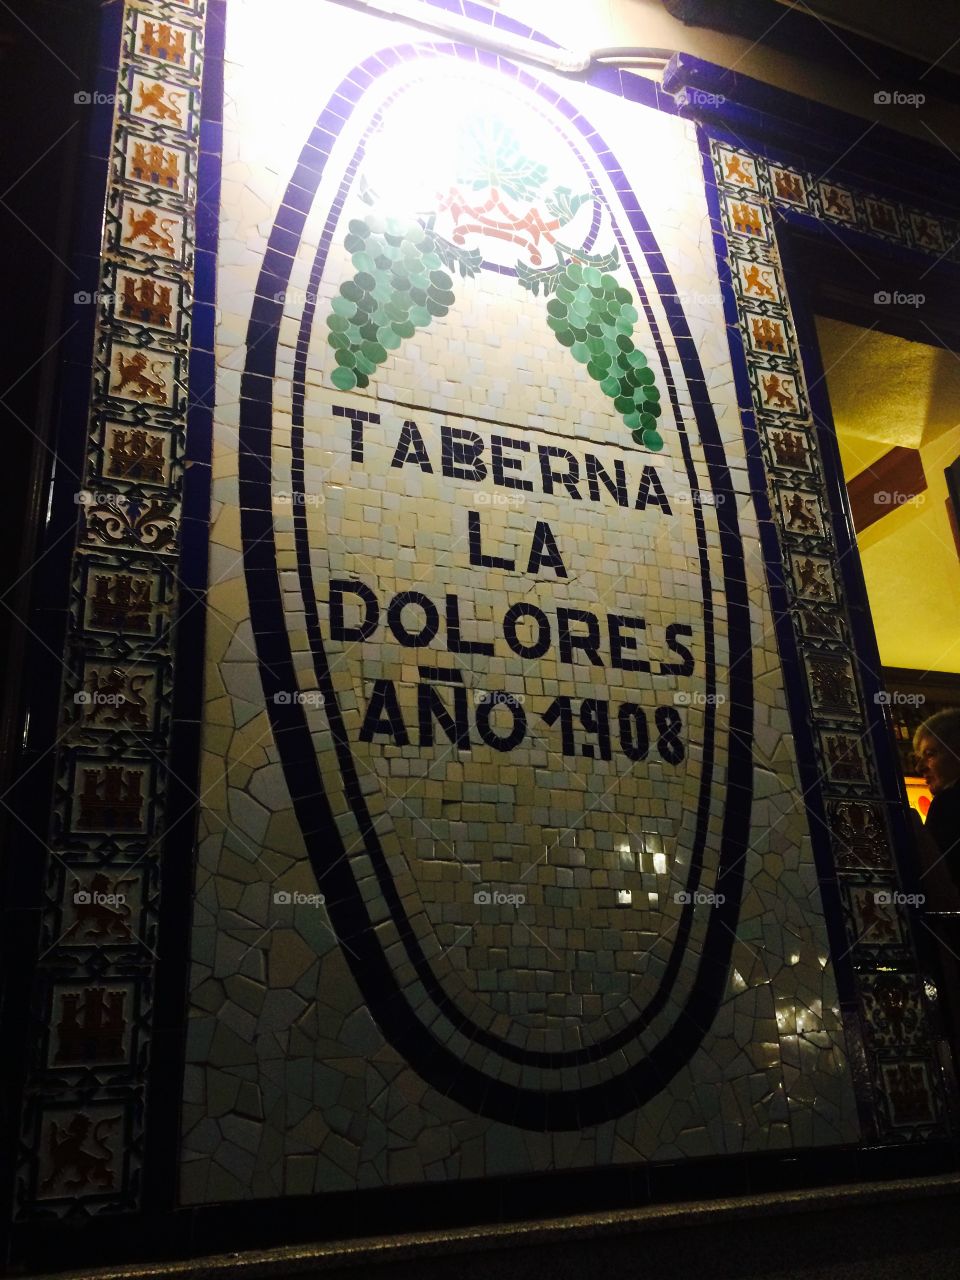 Name of a popular pub in Madrid city centre painted on ceramic tiles and displayed at the entrance 